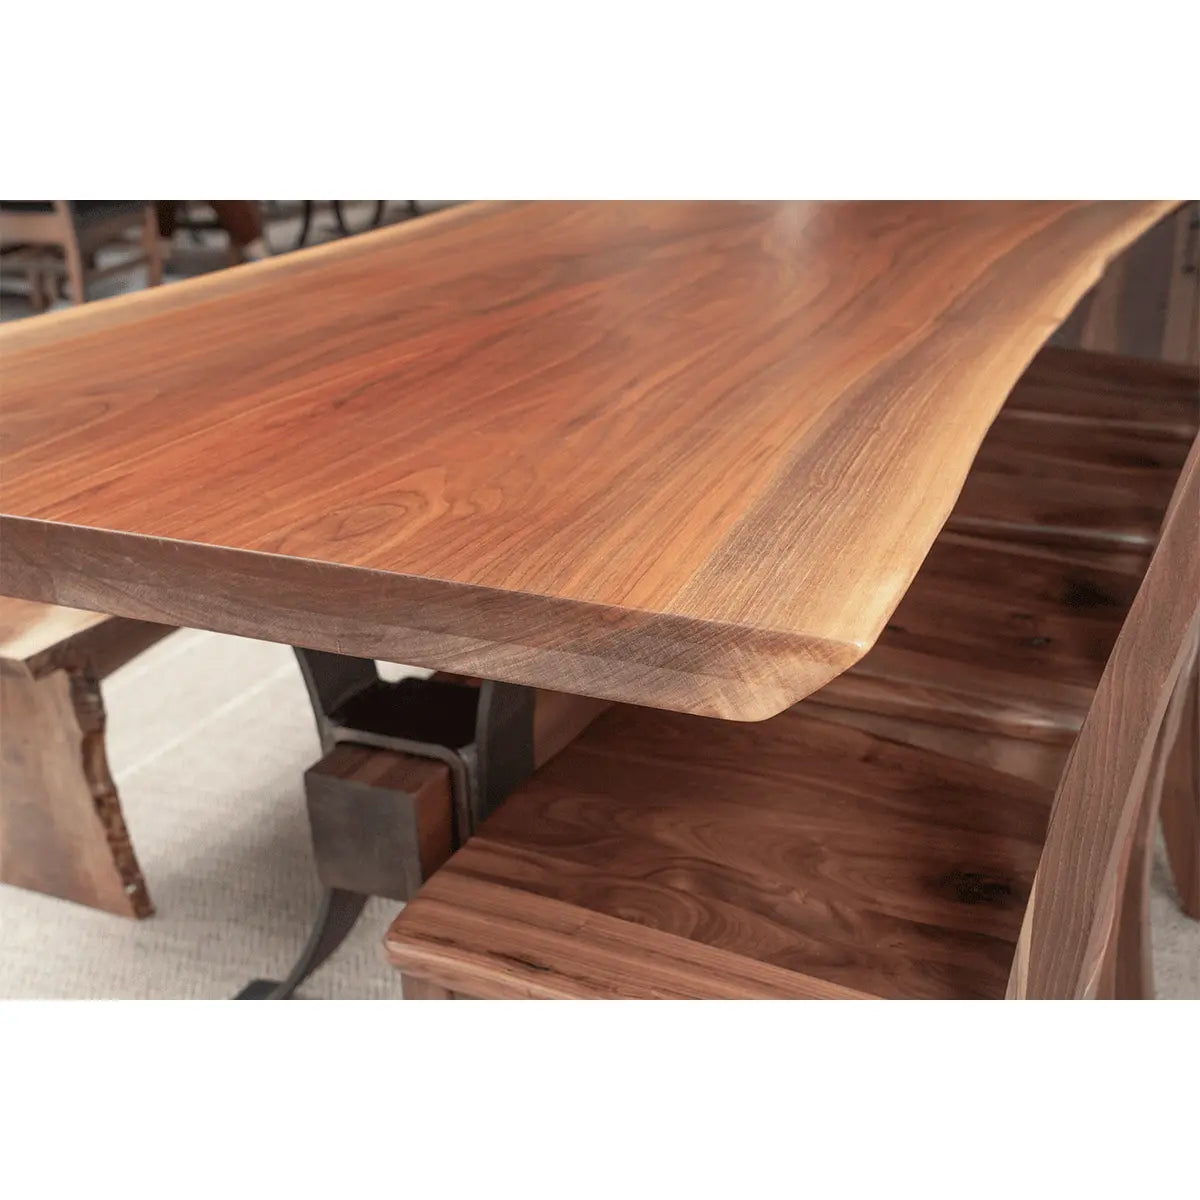 Live Edge Walnut Dining Table Details